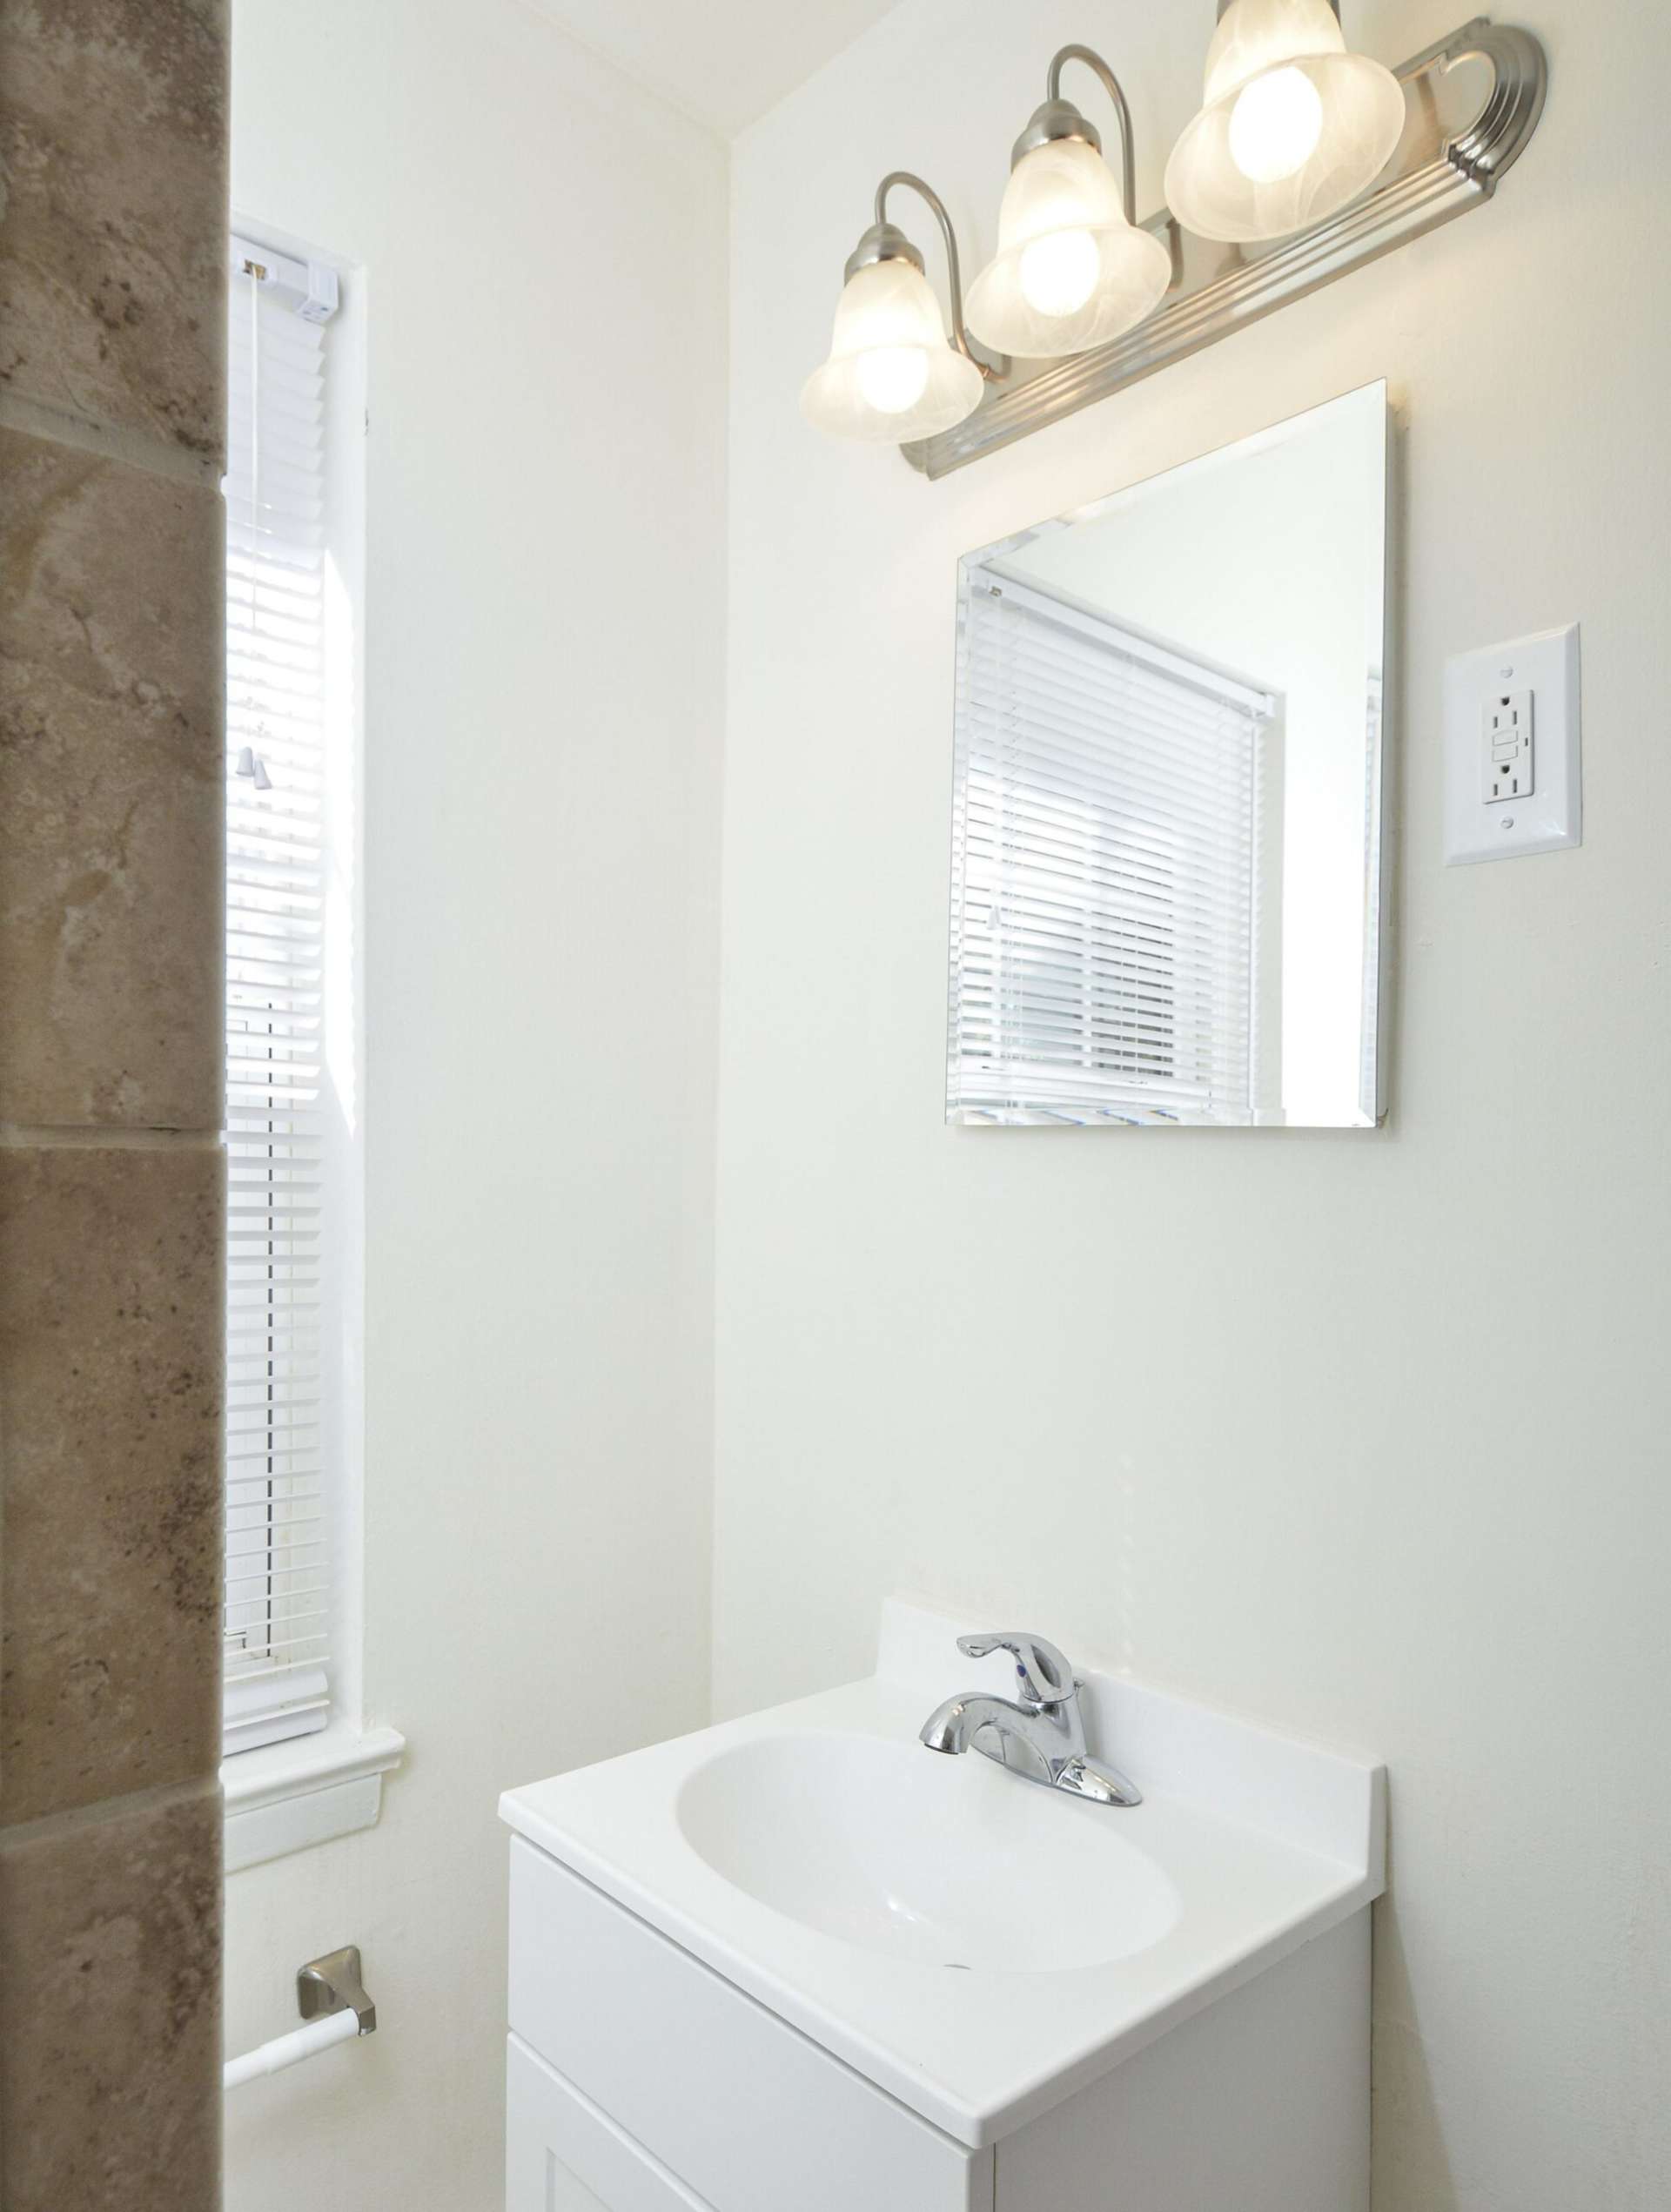 Bathroom with a window, small mirror, and sink.